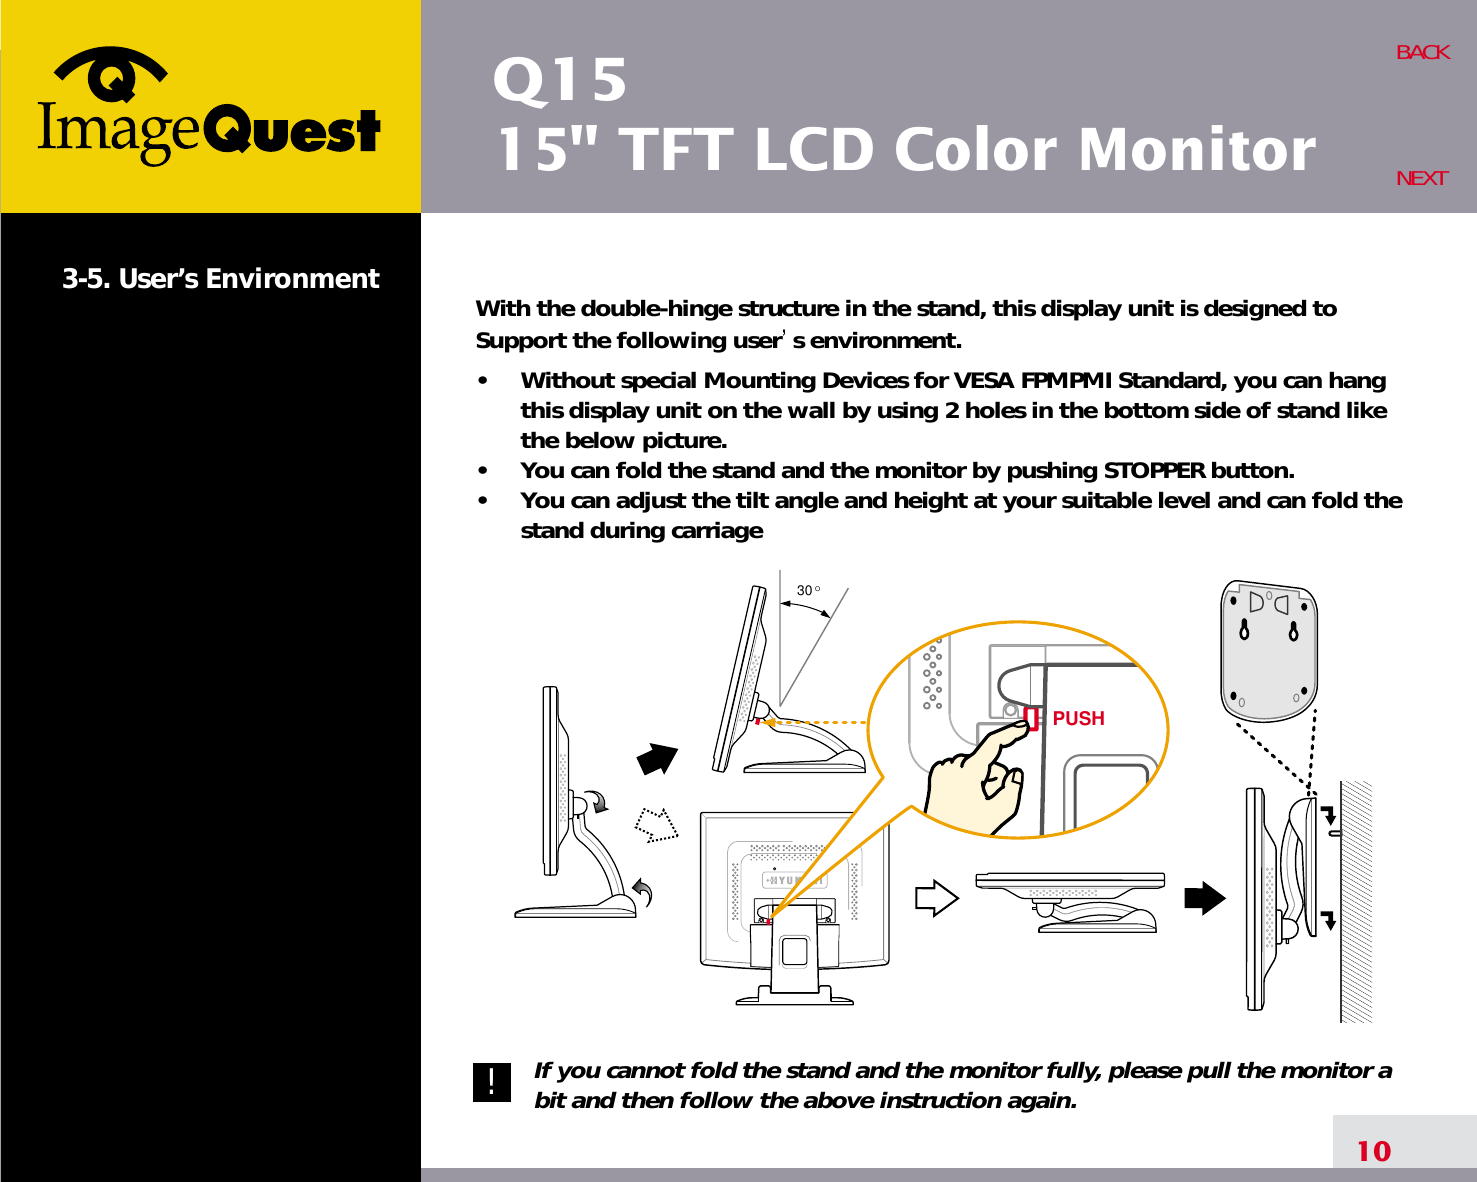 Q1515&quot; TFT LCD Color Monitor3-5. User’s Environment With the double-hinge structure in the stand, this display unit is designed toSupport the following user s environment.•     Without special Mounting Devices for VESA FPMPMI Standard, you can hangthis display unit on the wall by using 2 holes in the bottom side of stand likethe below picture.•     You can fold the stand and the monitor by pushing STOPPER button.•     You can adjust the tilt angle and height at your suitable level and can fold thestand during carriageIf you cannot fold the stand and the monitor fully, please pull the monitor abit and then follow the above instruction again.10BACKNEXT30 OPUSH!!